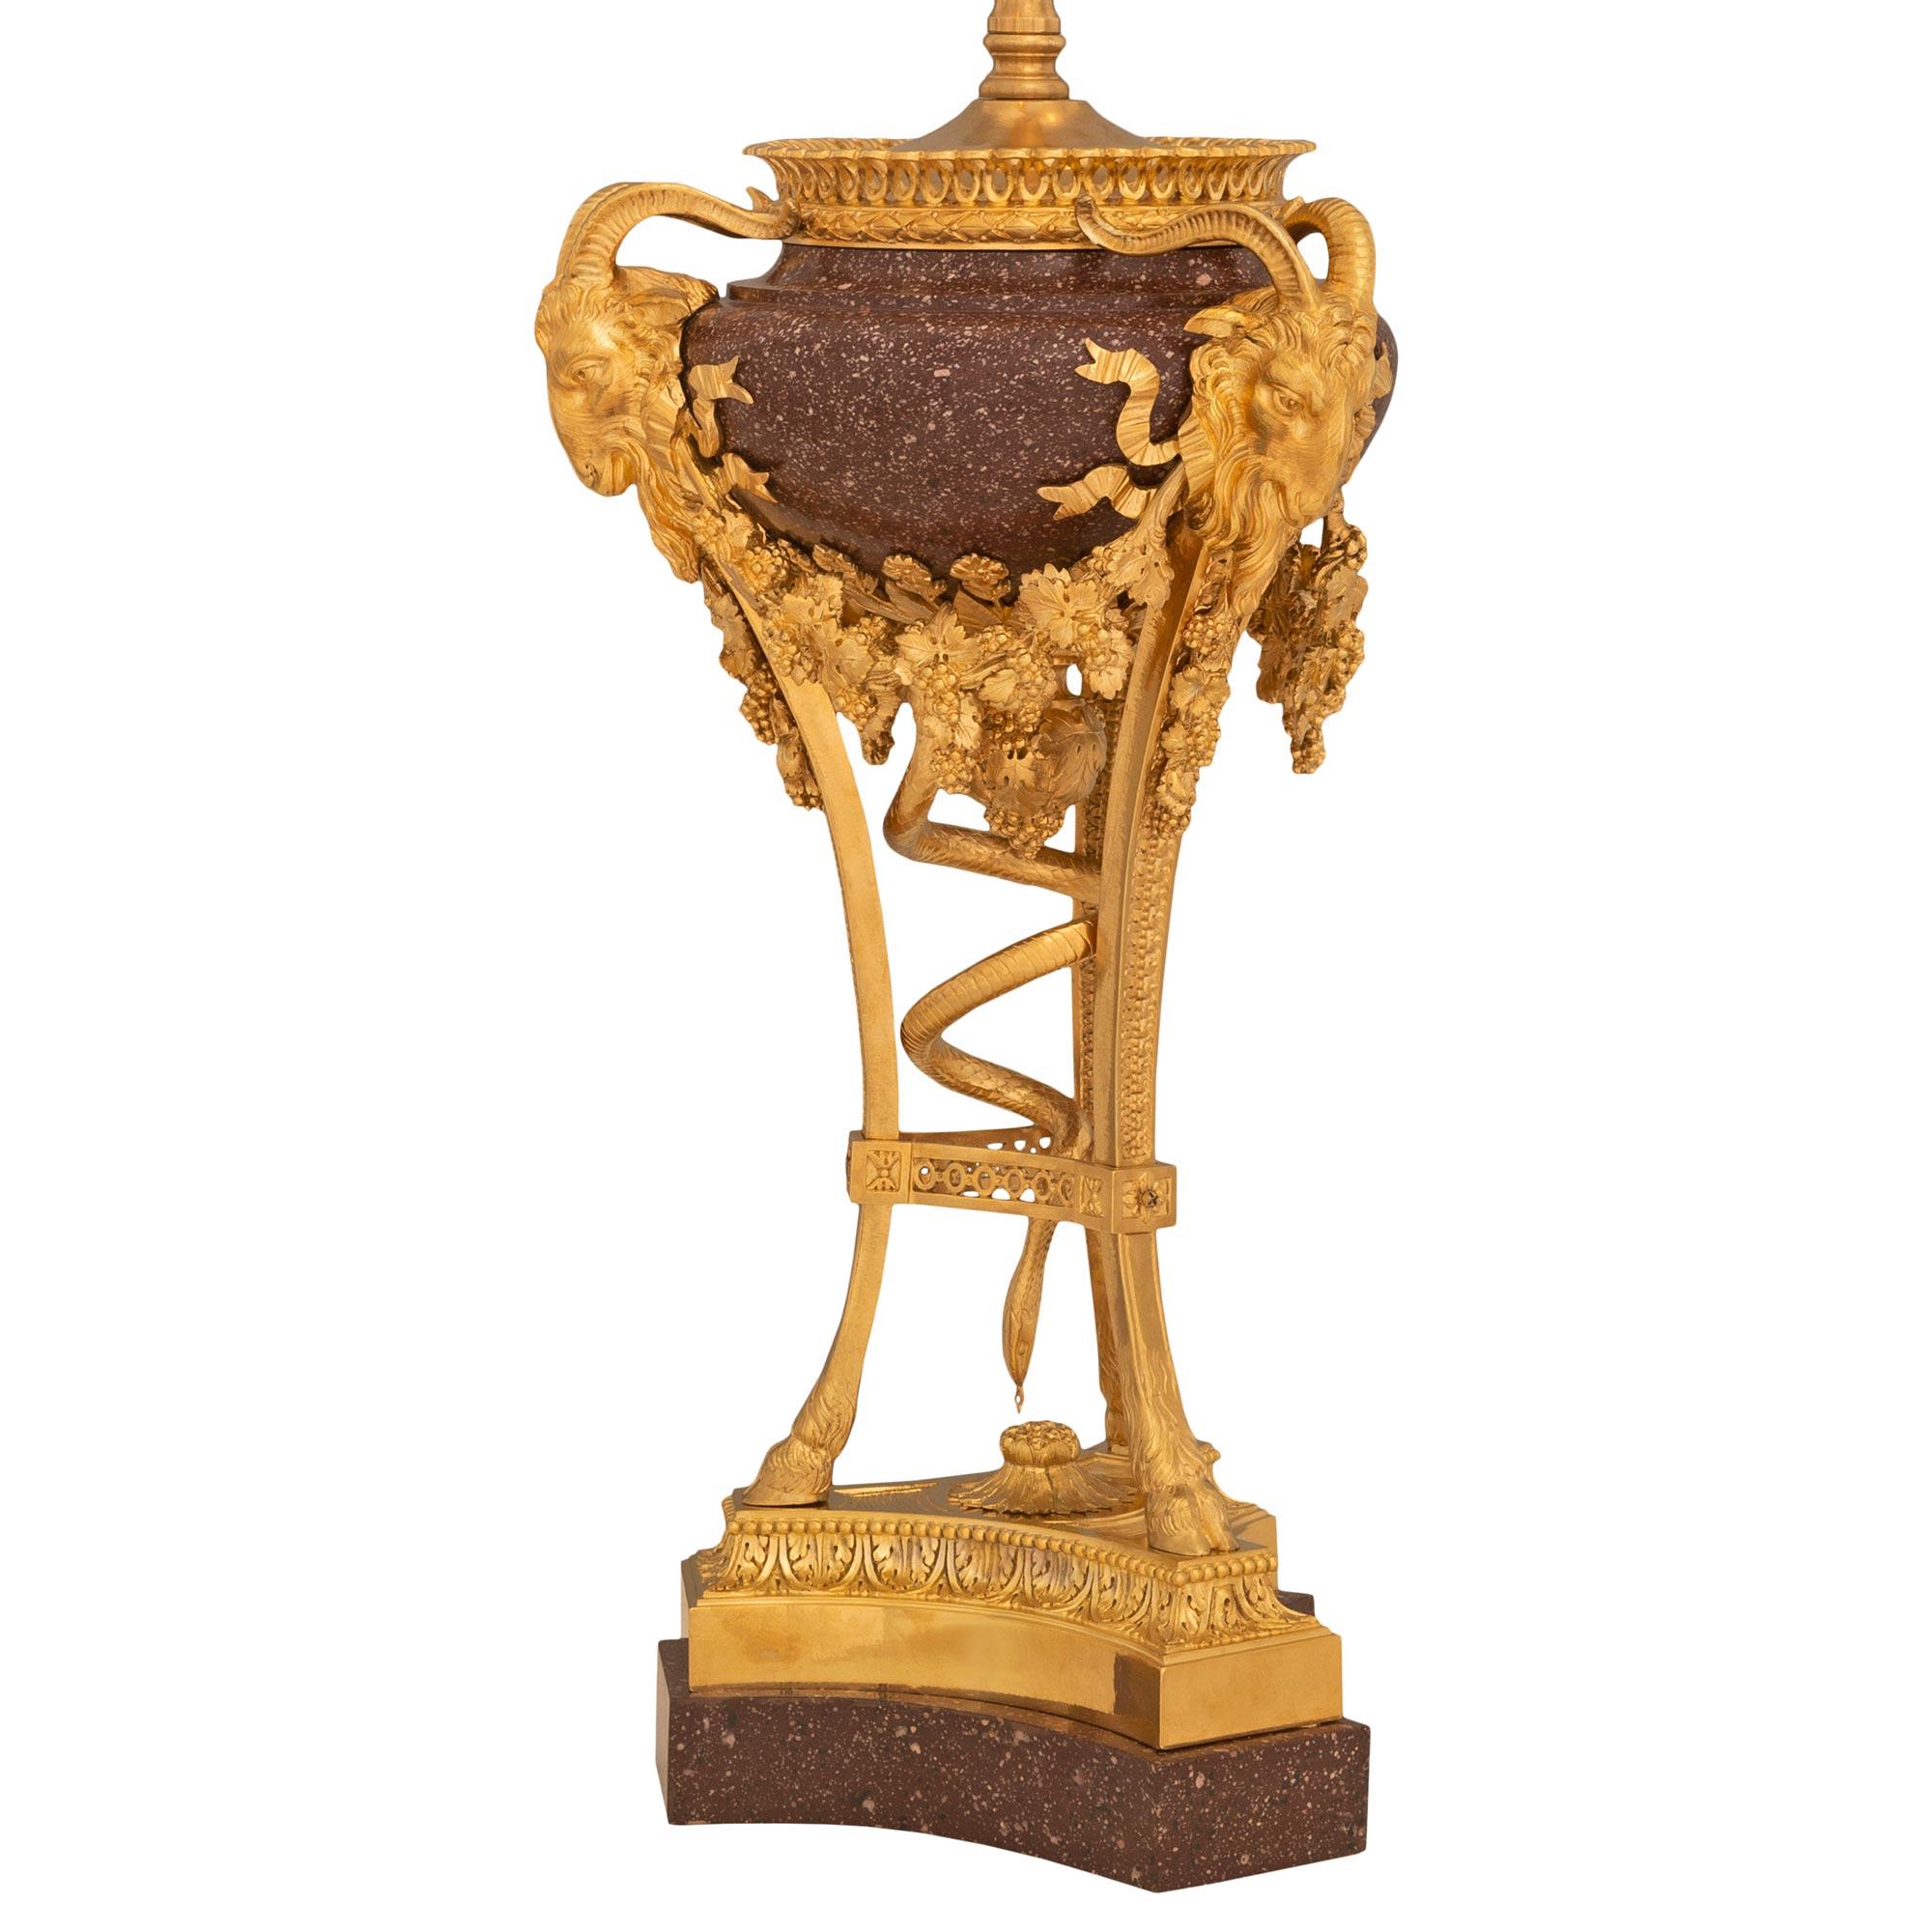 An exceptional and very high quality French 19th century Louis XVI st. Porphyry, ormolu and faux painted Porphyry lamp attributed to Sormani. The brûle parfum lamp is raised by an elegant circular mottled wonderfully executed faux painted Porphyry